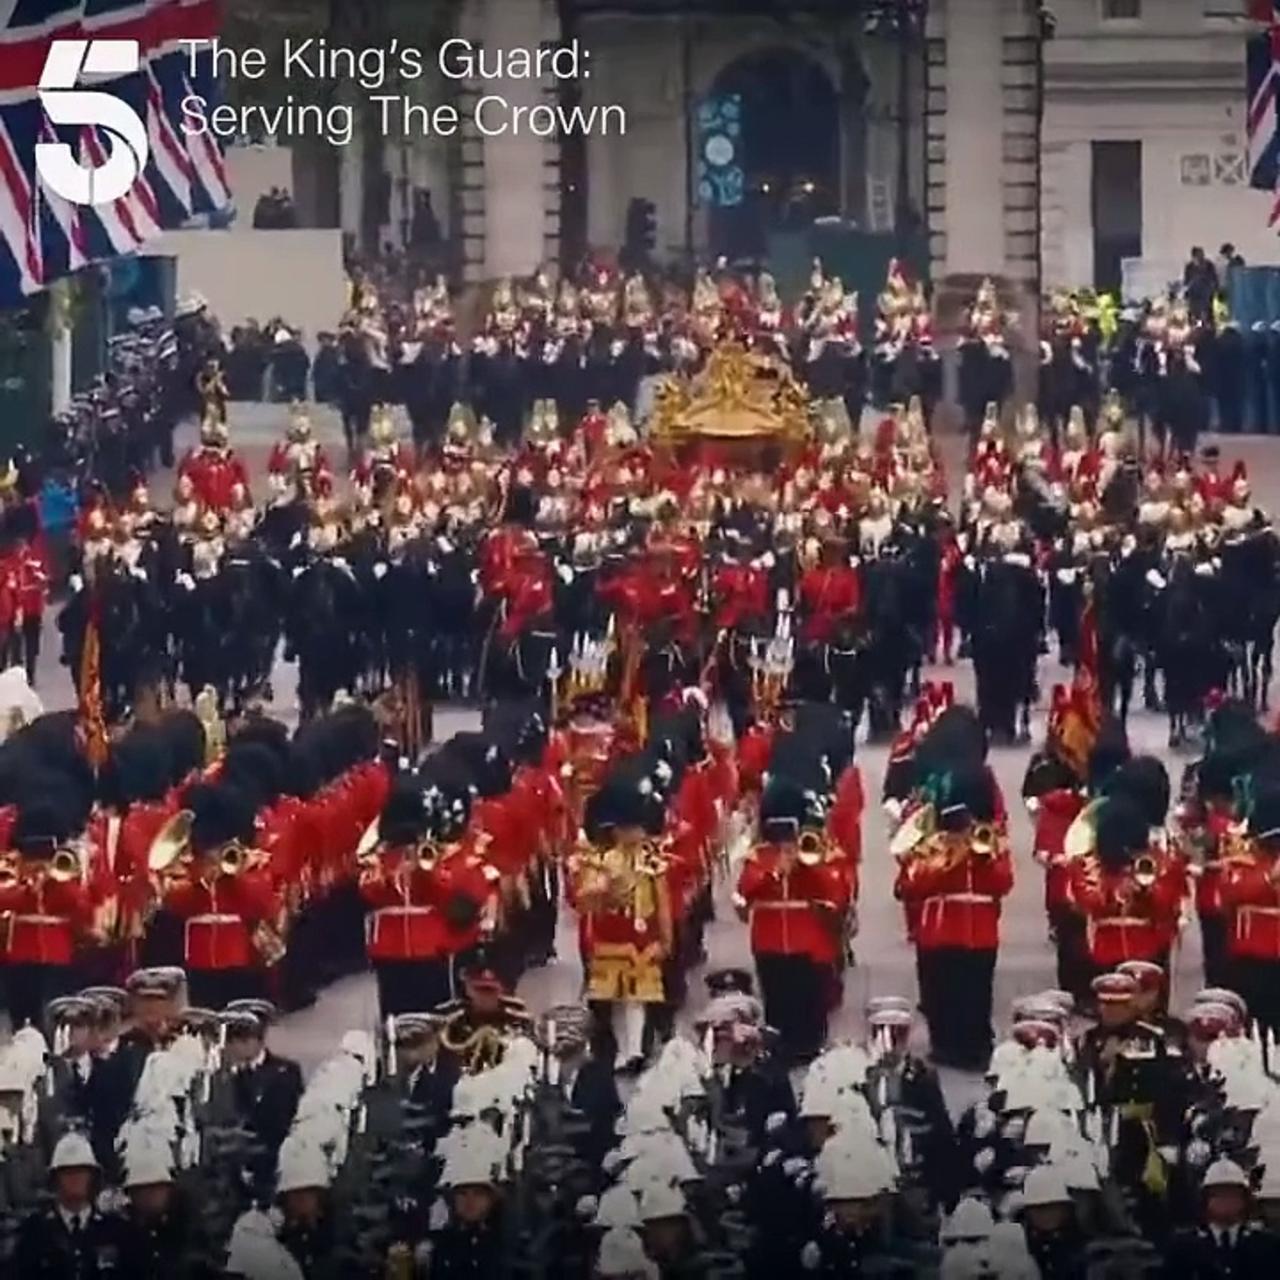 The King's Guard Serving the Crown